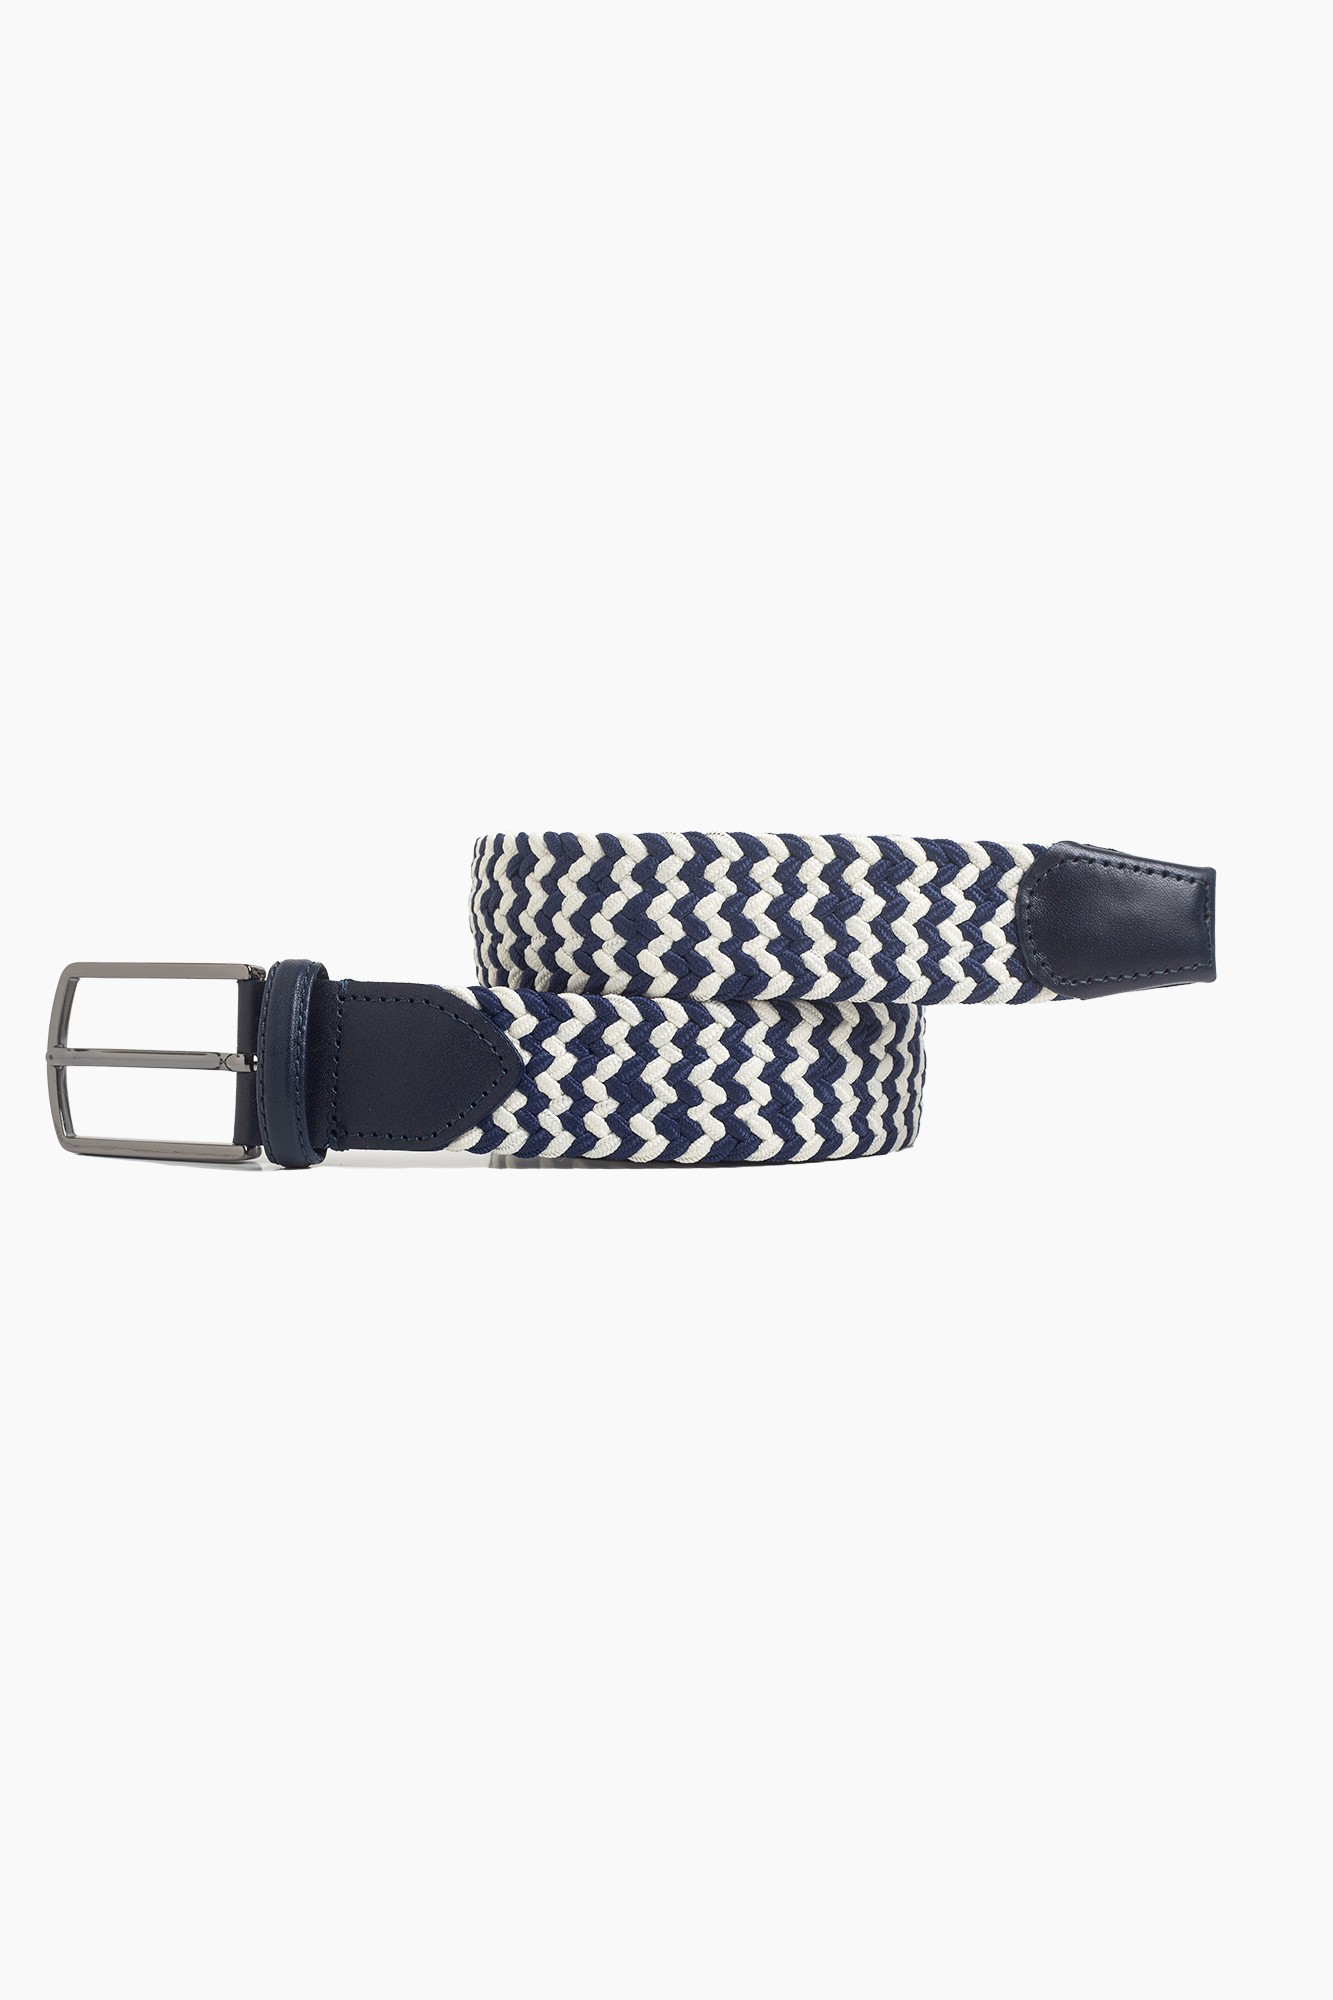 Elastic Knit Belt with Genuine Leather - Navy White